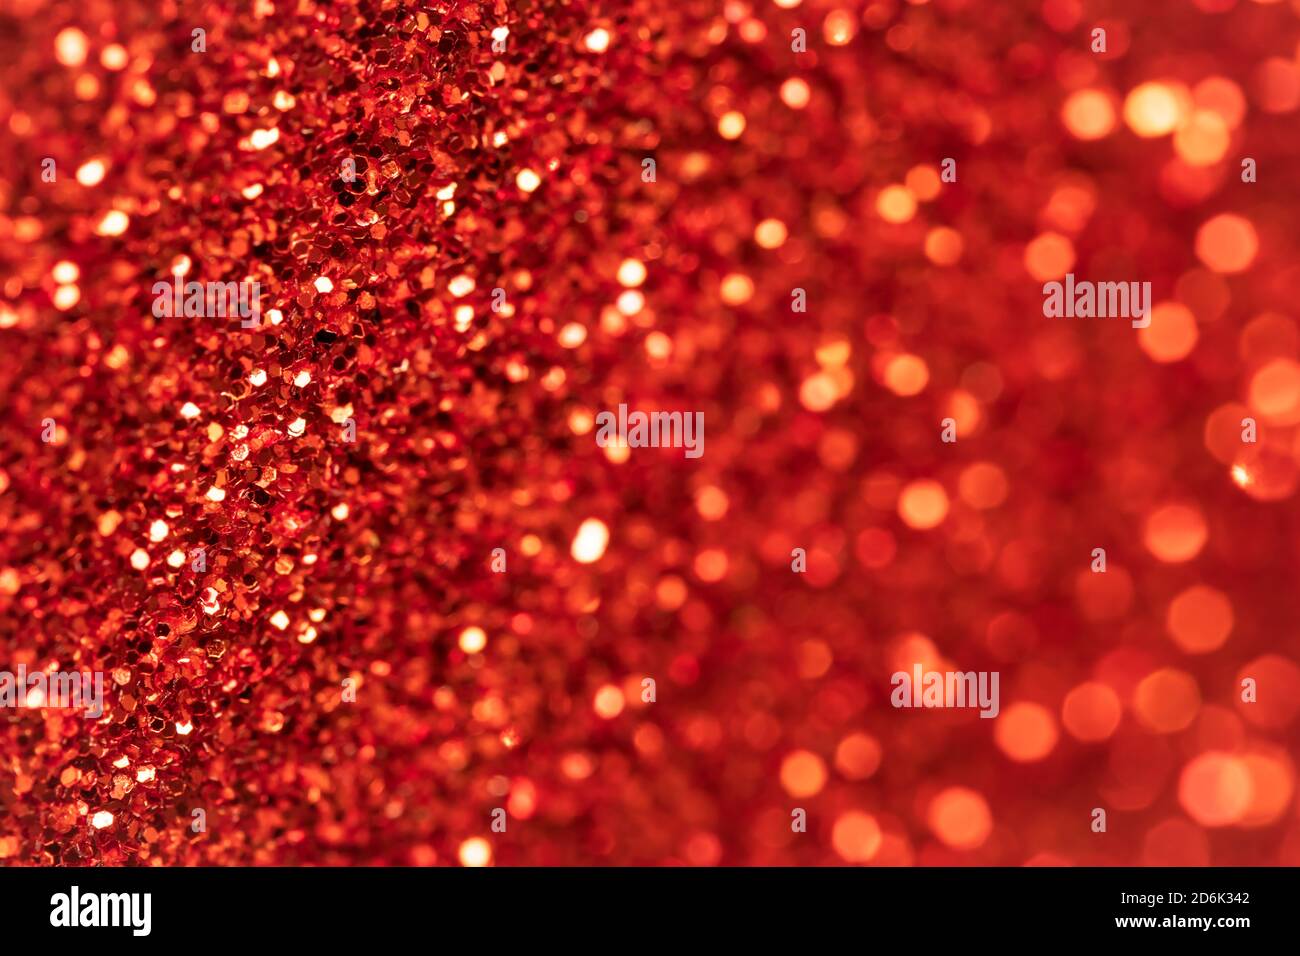 Sparkle red texture, Christmas background. Glitter textile surface. Abstract pattern. Festive abstraction. Shiny fabric with sequins. Holiday art desi Stock Photo